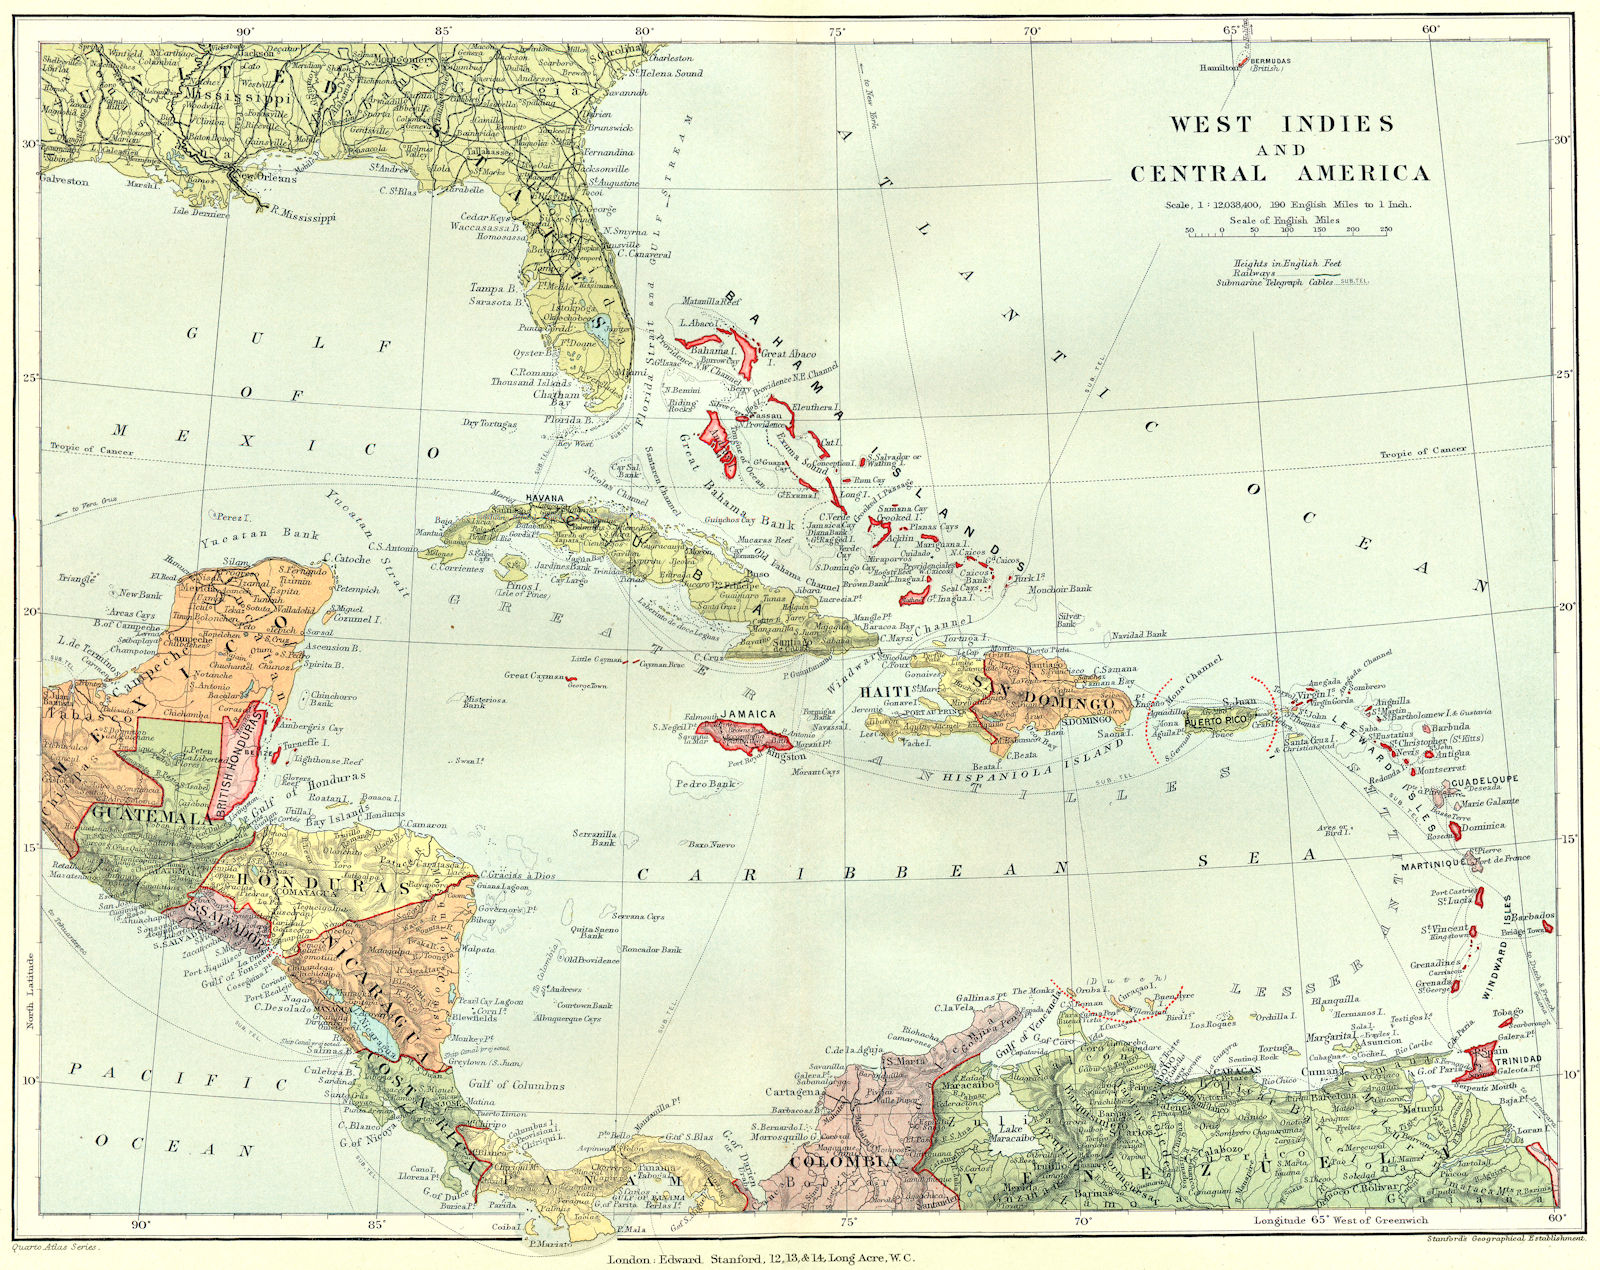 CENTRAL AMERICA/WEST INDIES. shows Danish Antilles. STANFORD 1906 old map